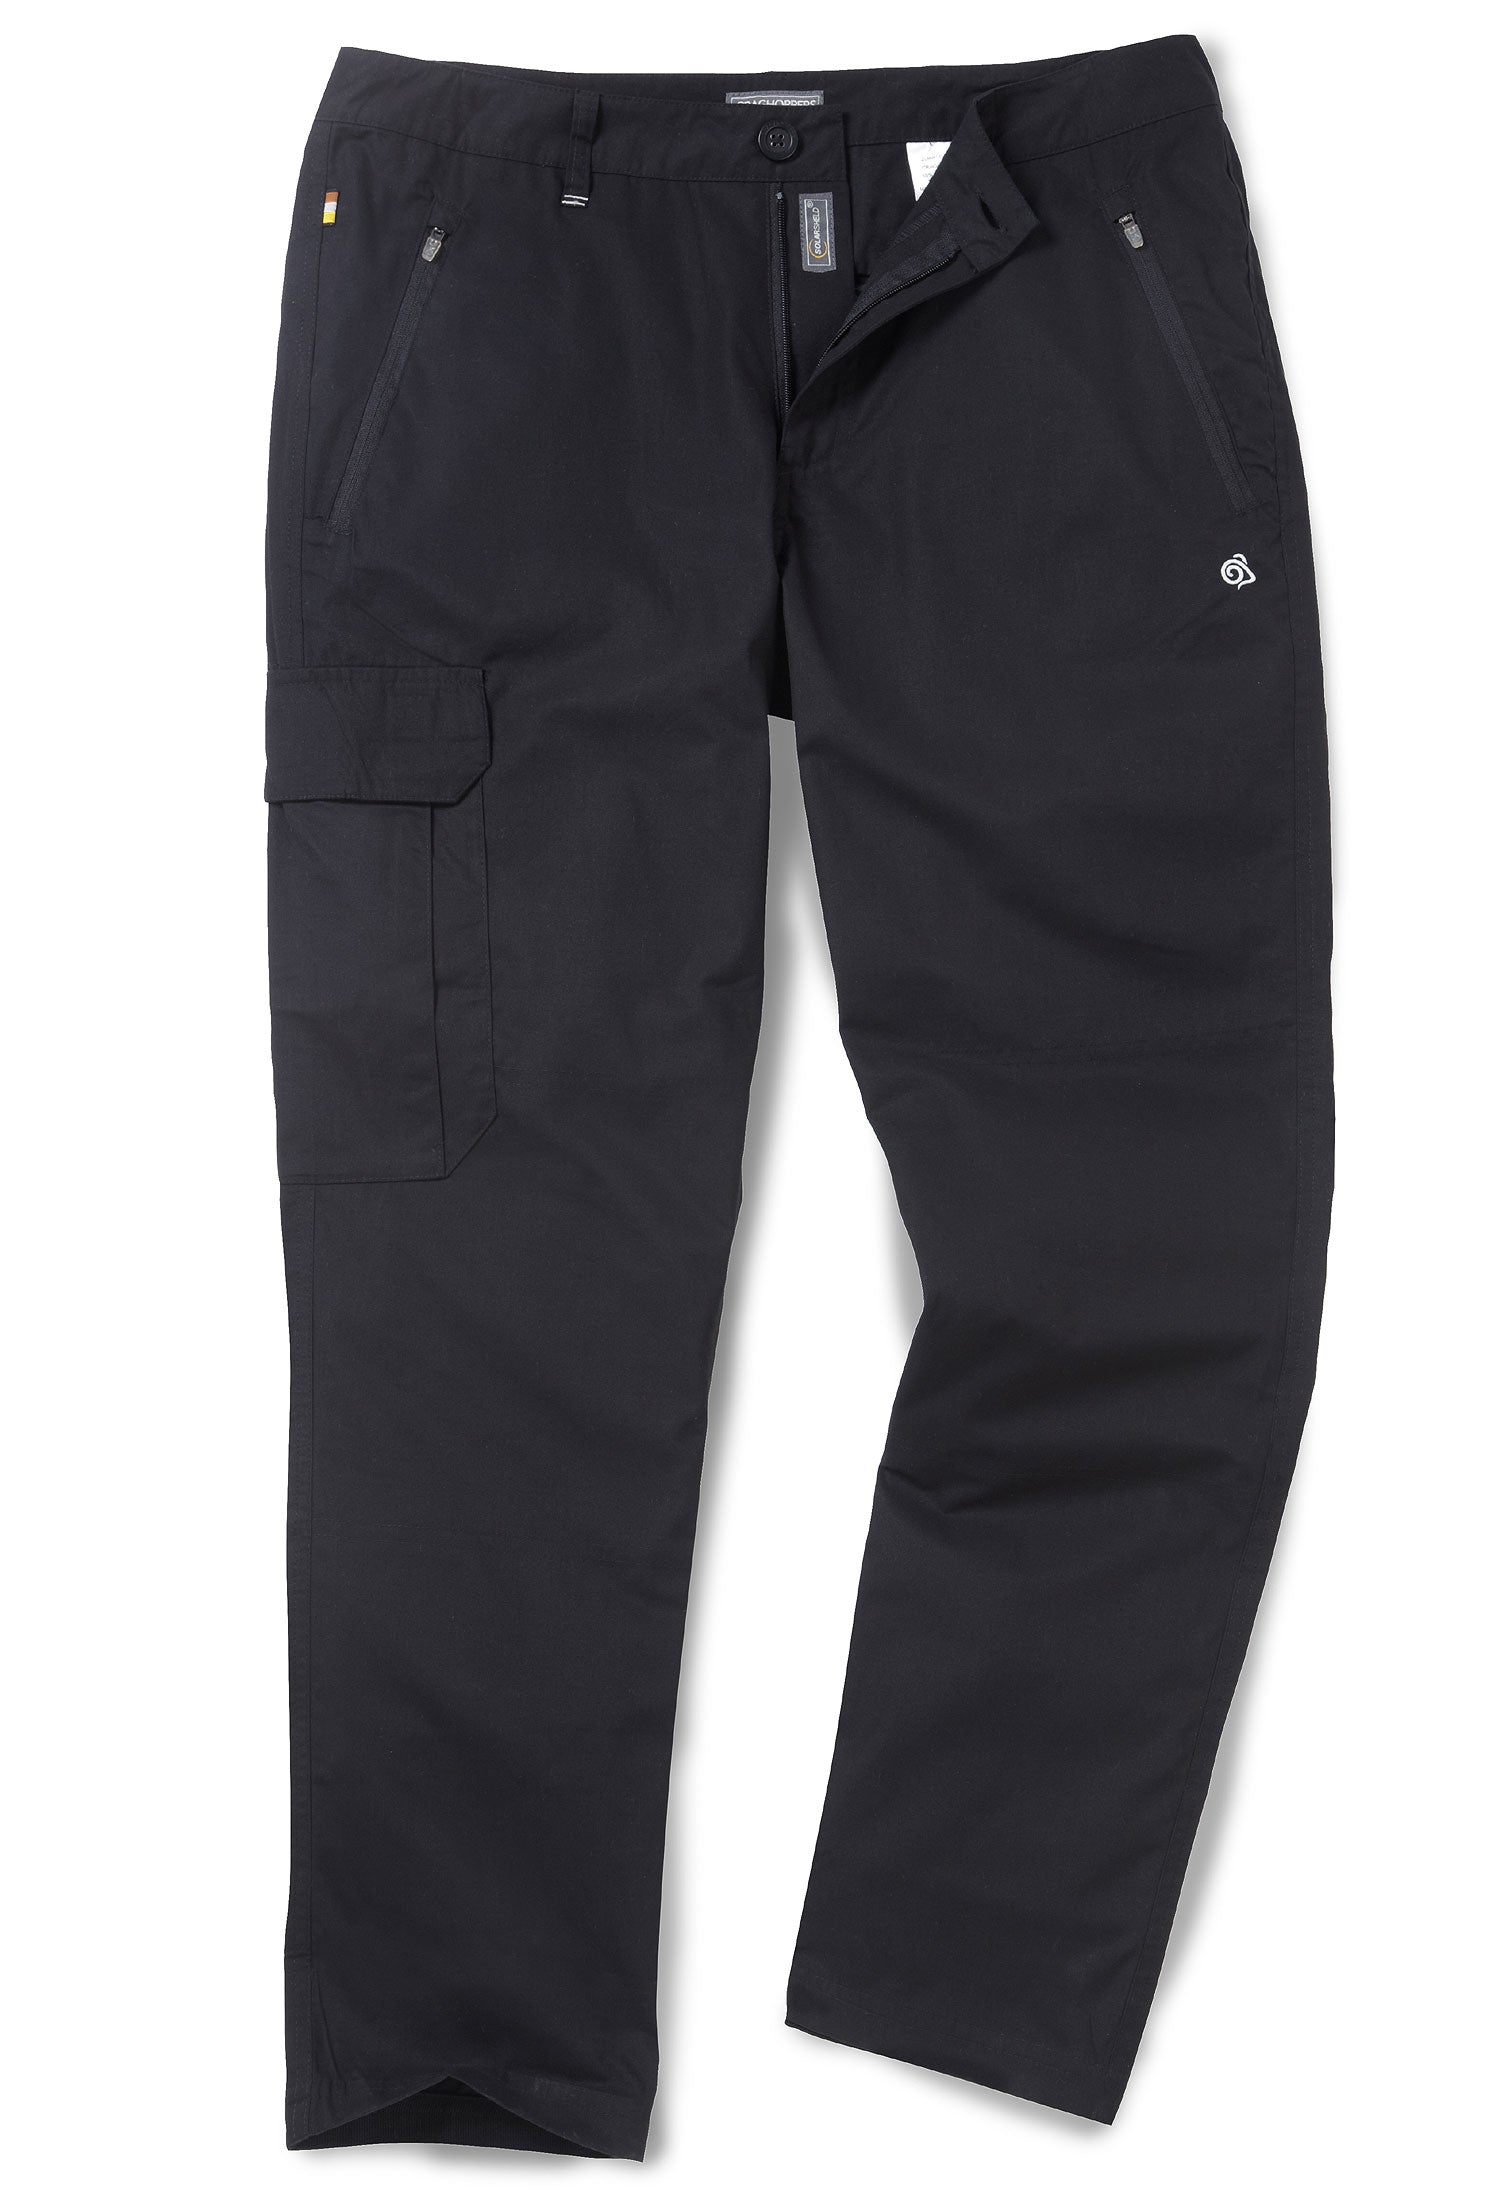 Traverse Trail Trousers by Craghoppers